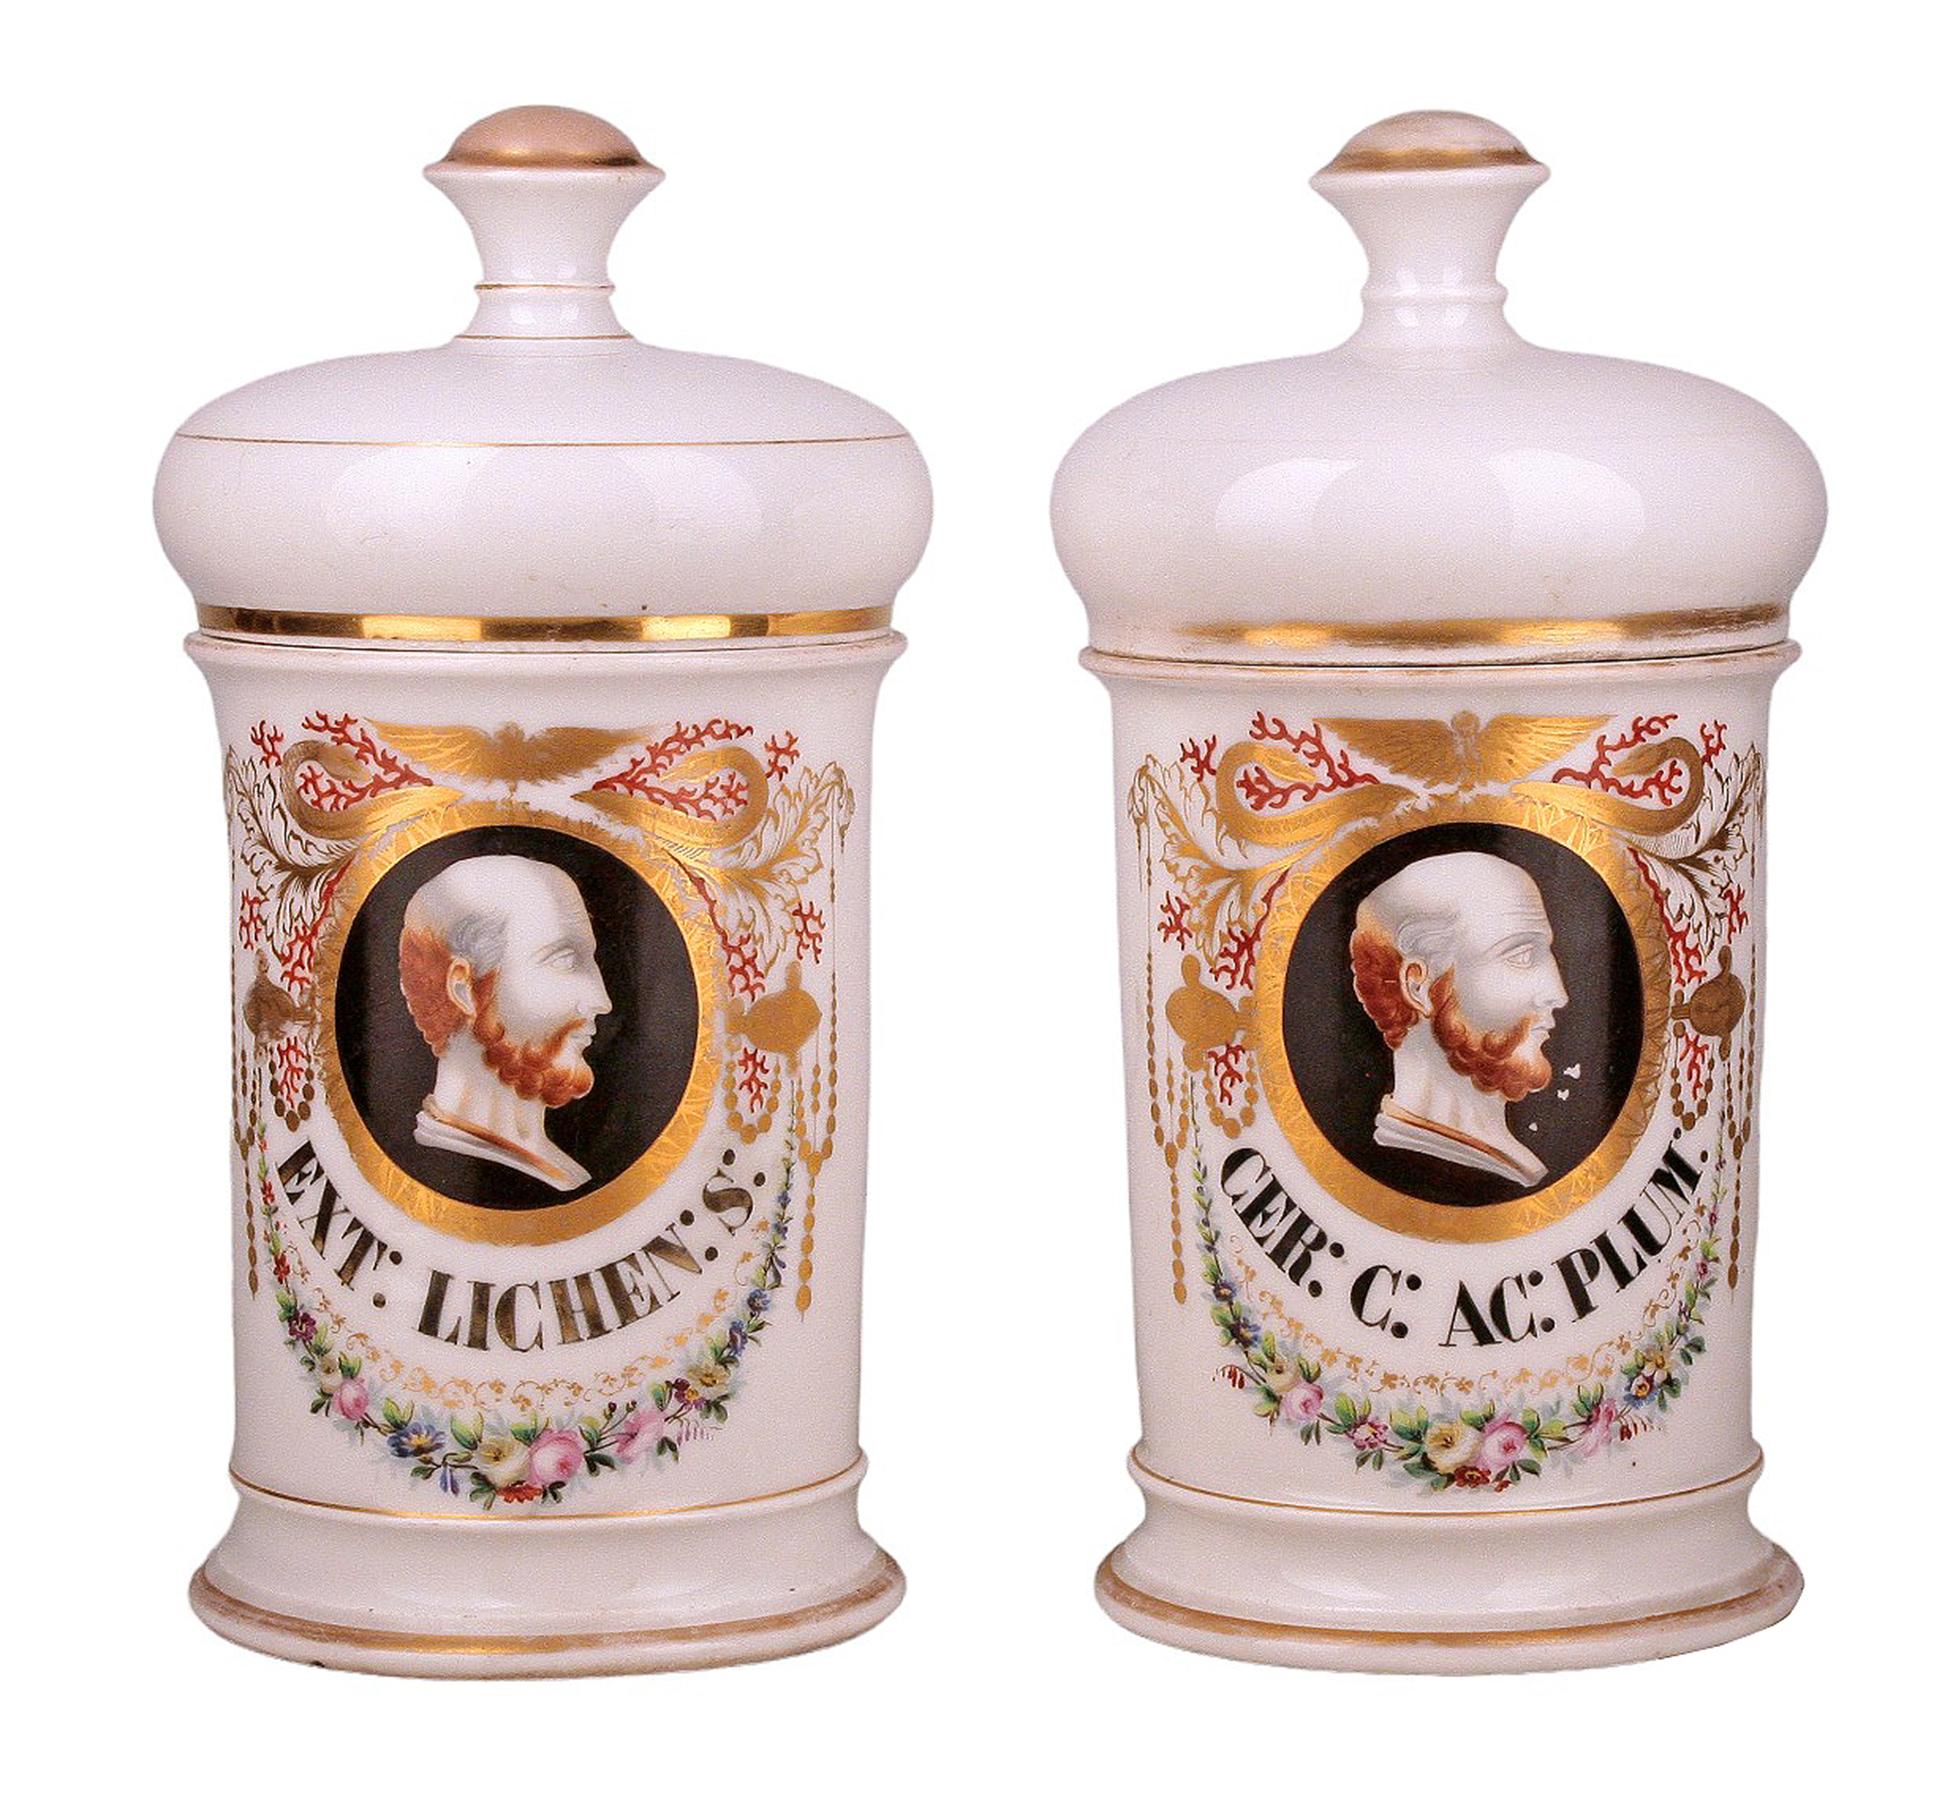 Set of french Neoclassical hand-crafted glazed porcelain apothecary/pharmacy jars with lids signed by Langlois

By: Langlois
Material: ceramic, porcelain, paint, enamel
Technique: molded, pressed, painted, hand-painted, hand-crafted, gilt, enameled,